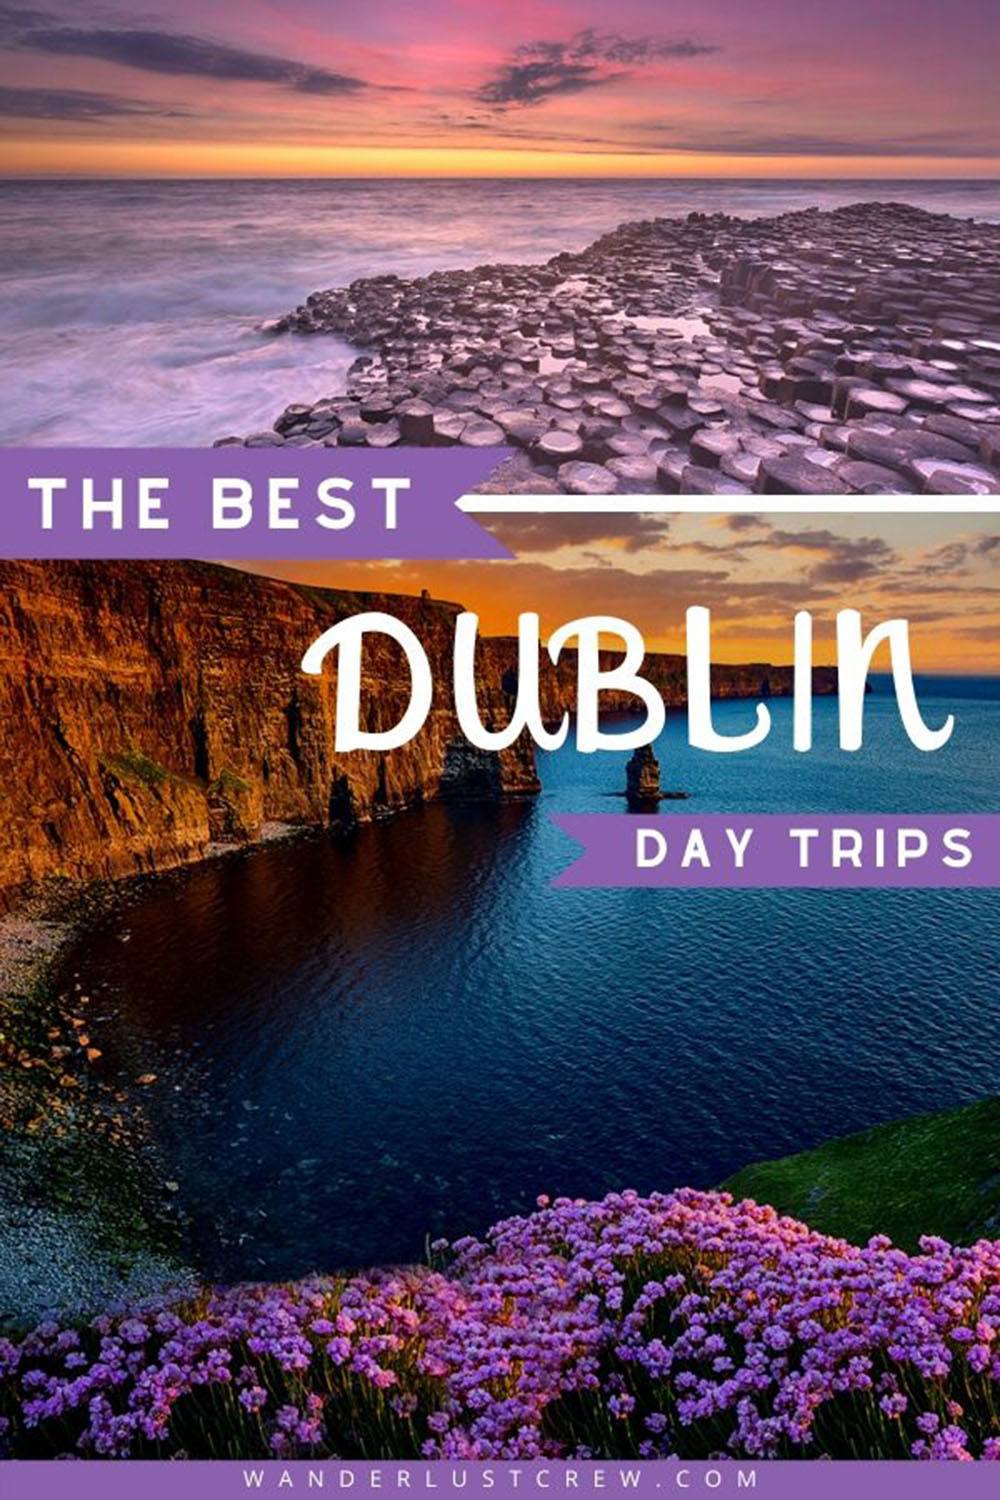 If you plan to base yourself in Dublin for your Ireland vacation, you'll want to venture out a bit. These are my favorite day trips from Dublin.